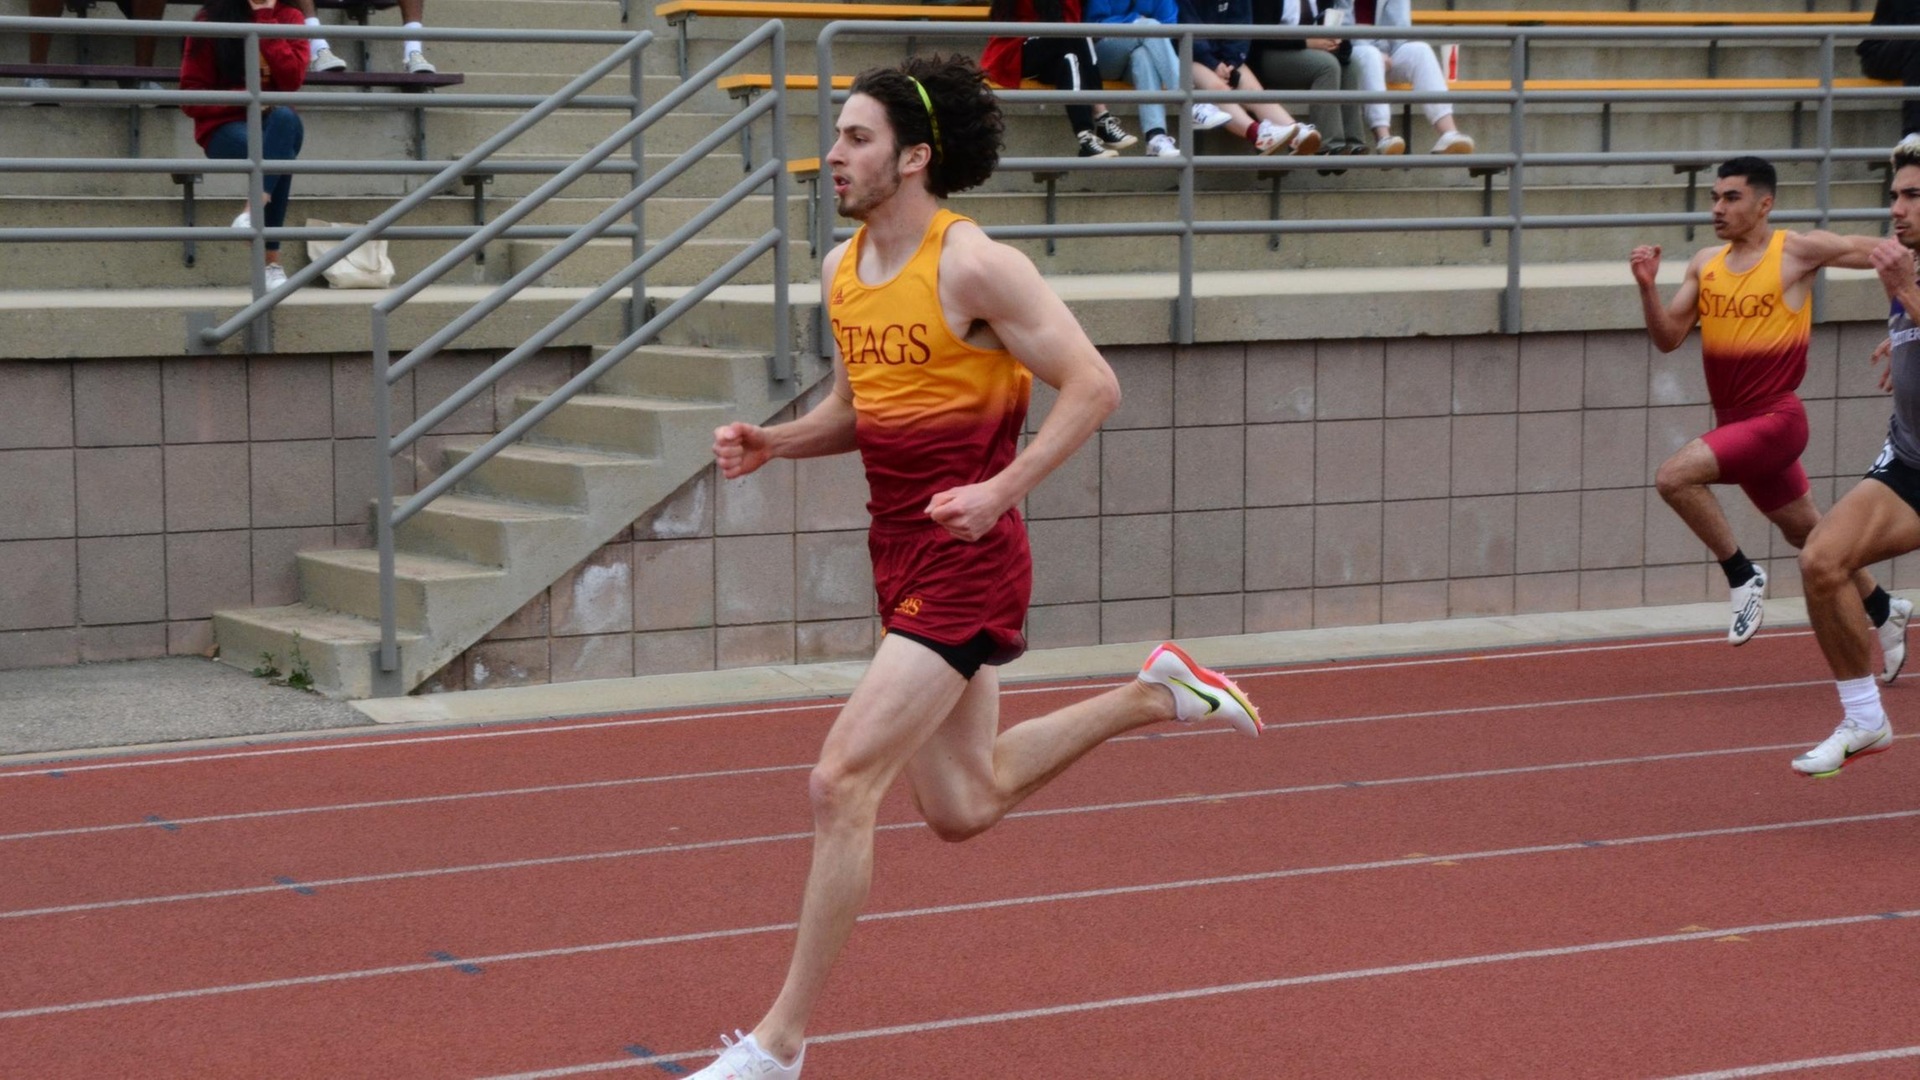 Jamie Cockburn on his way to a win in the 200